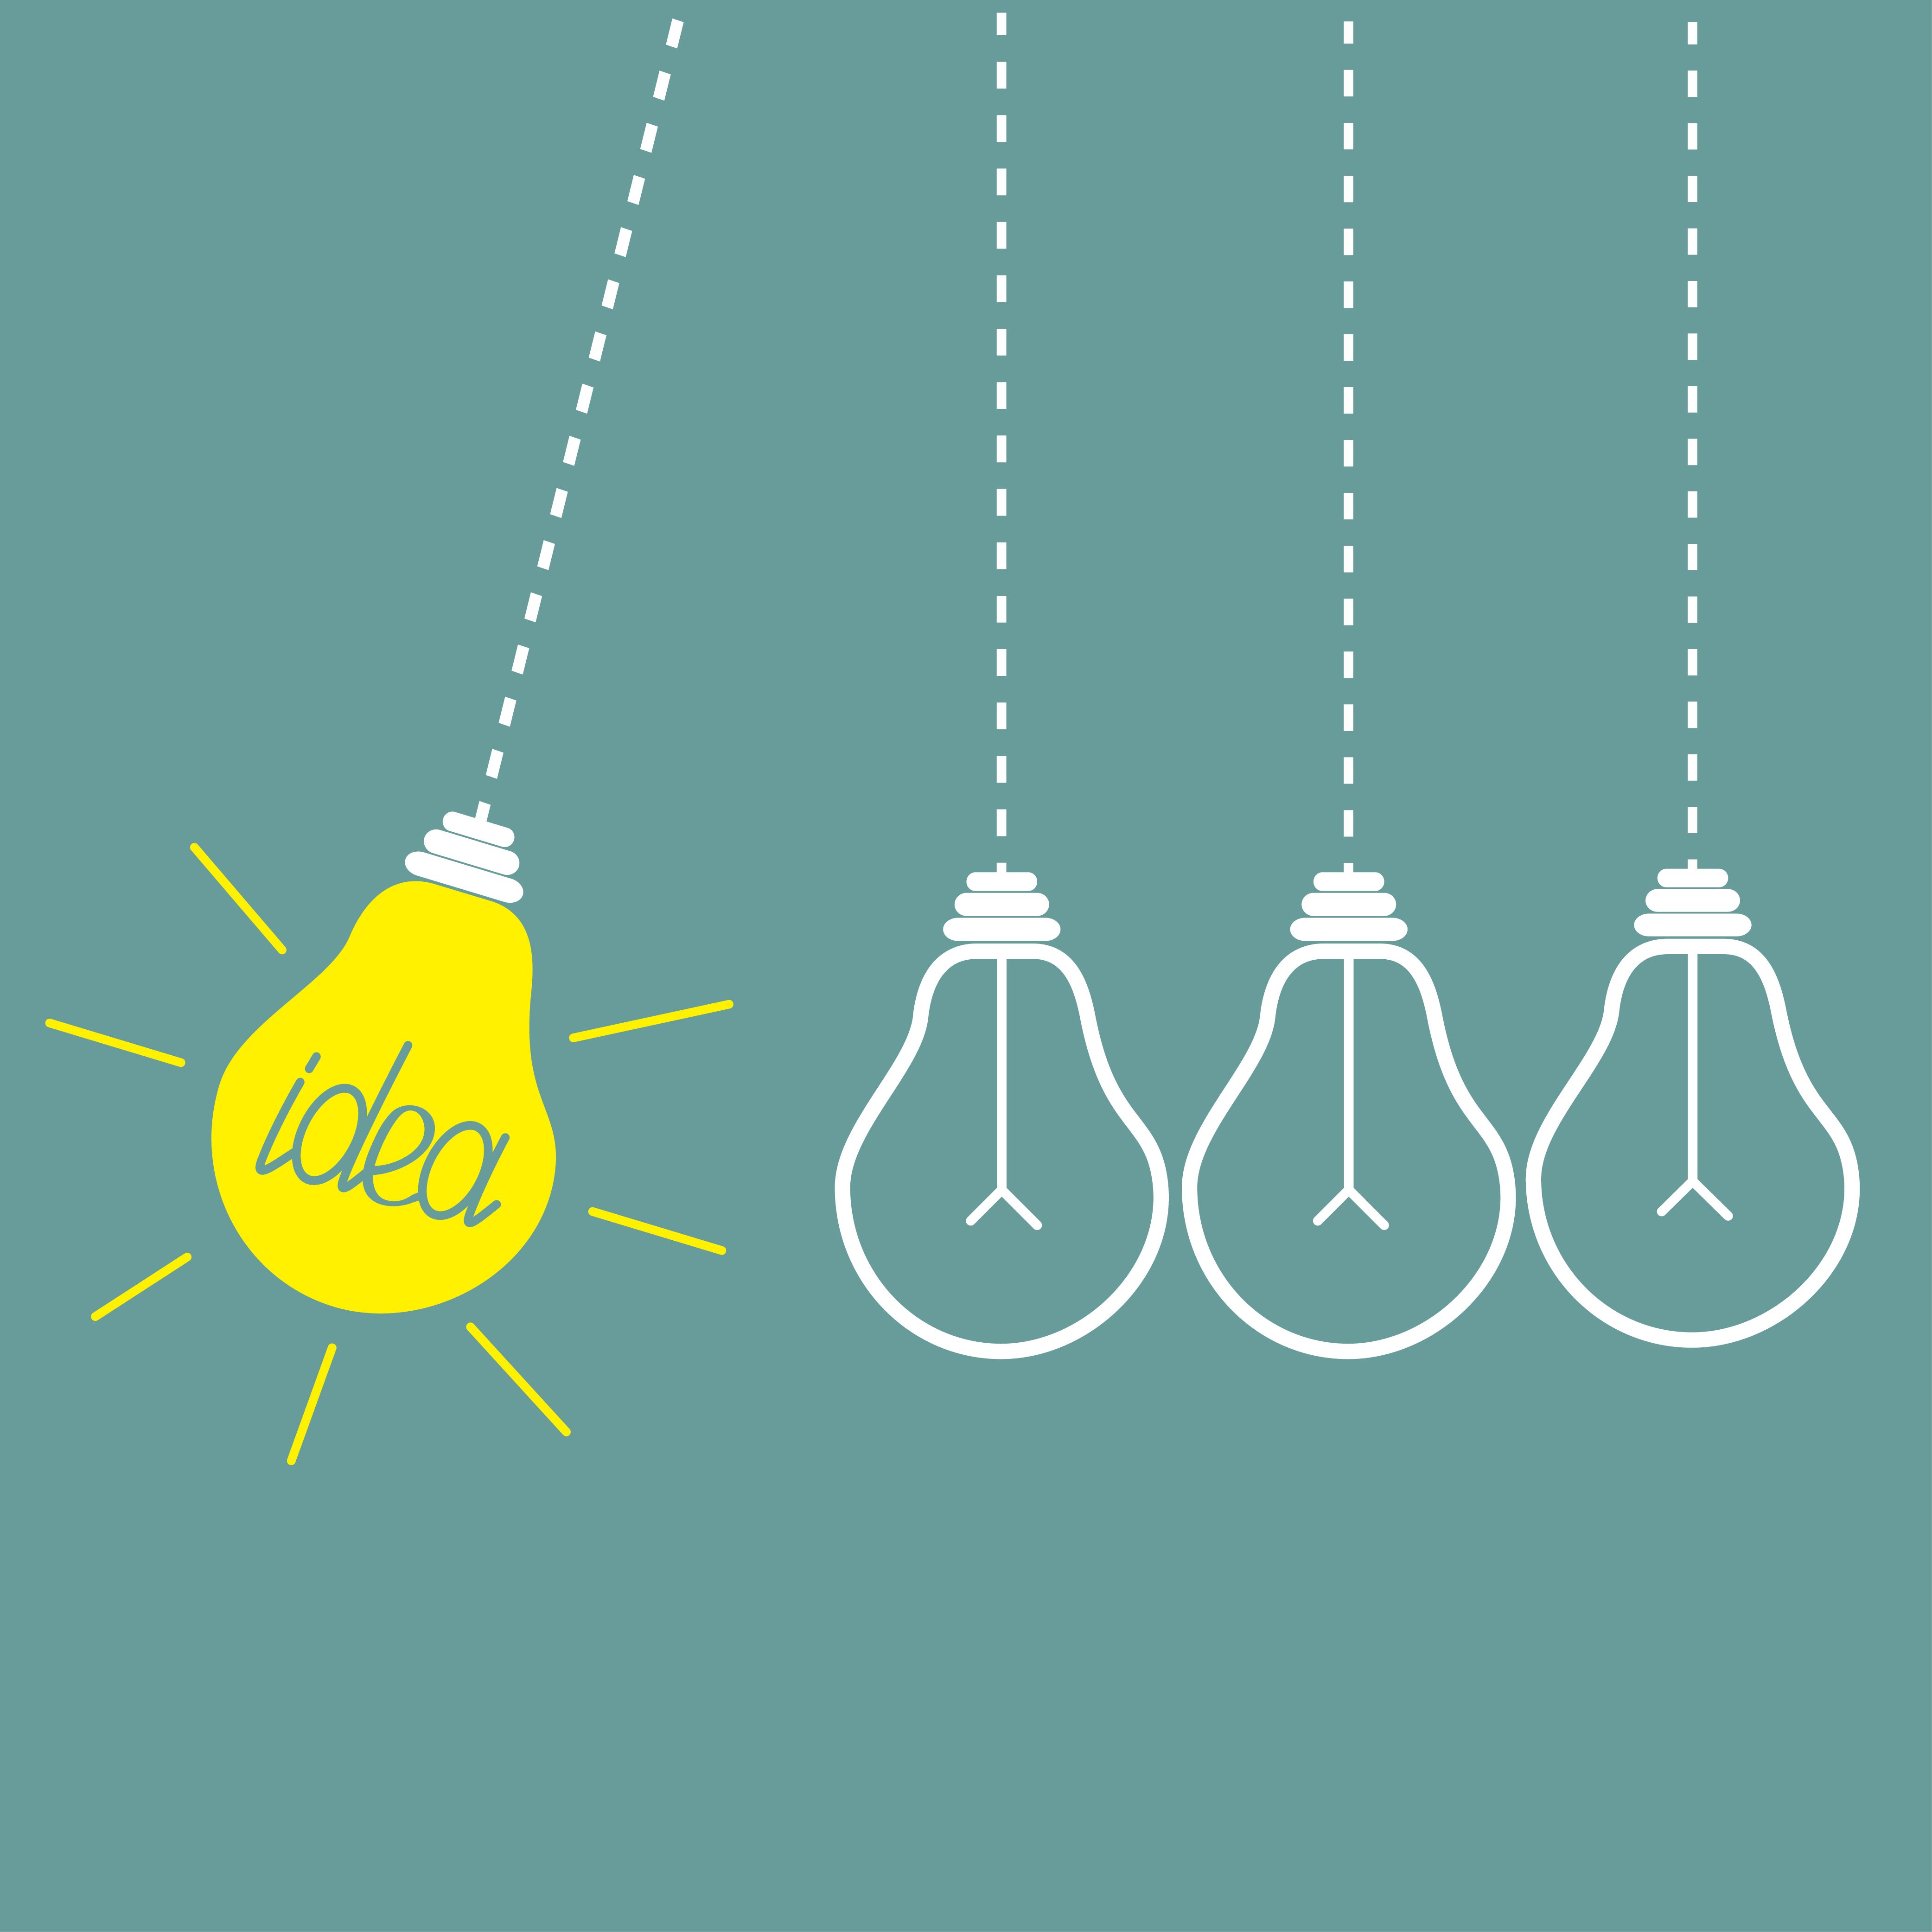 Four hanging yellow light bulbs. Perpetual motion.  Idea concept. Vector illustration.